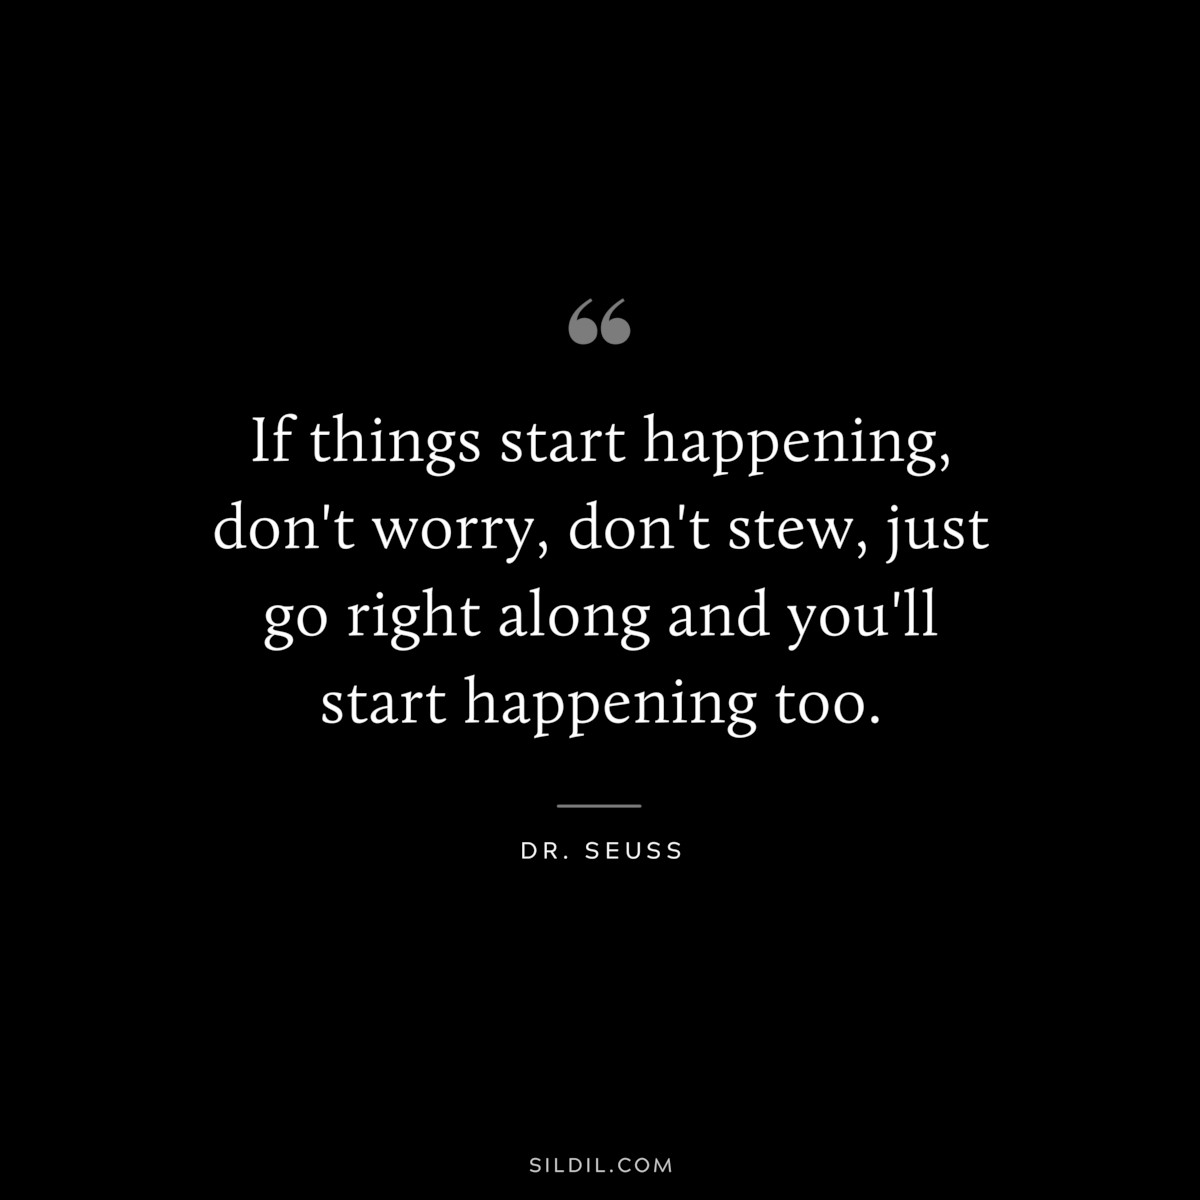 If things start happening, don't worry, don't stew, just go right along and you'll start happening too. ― Dr. Seuss